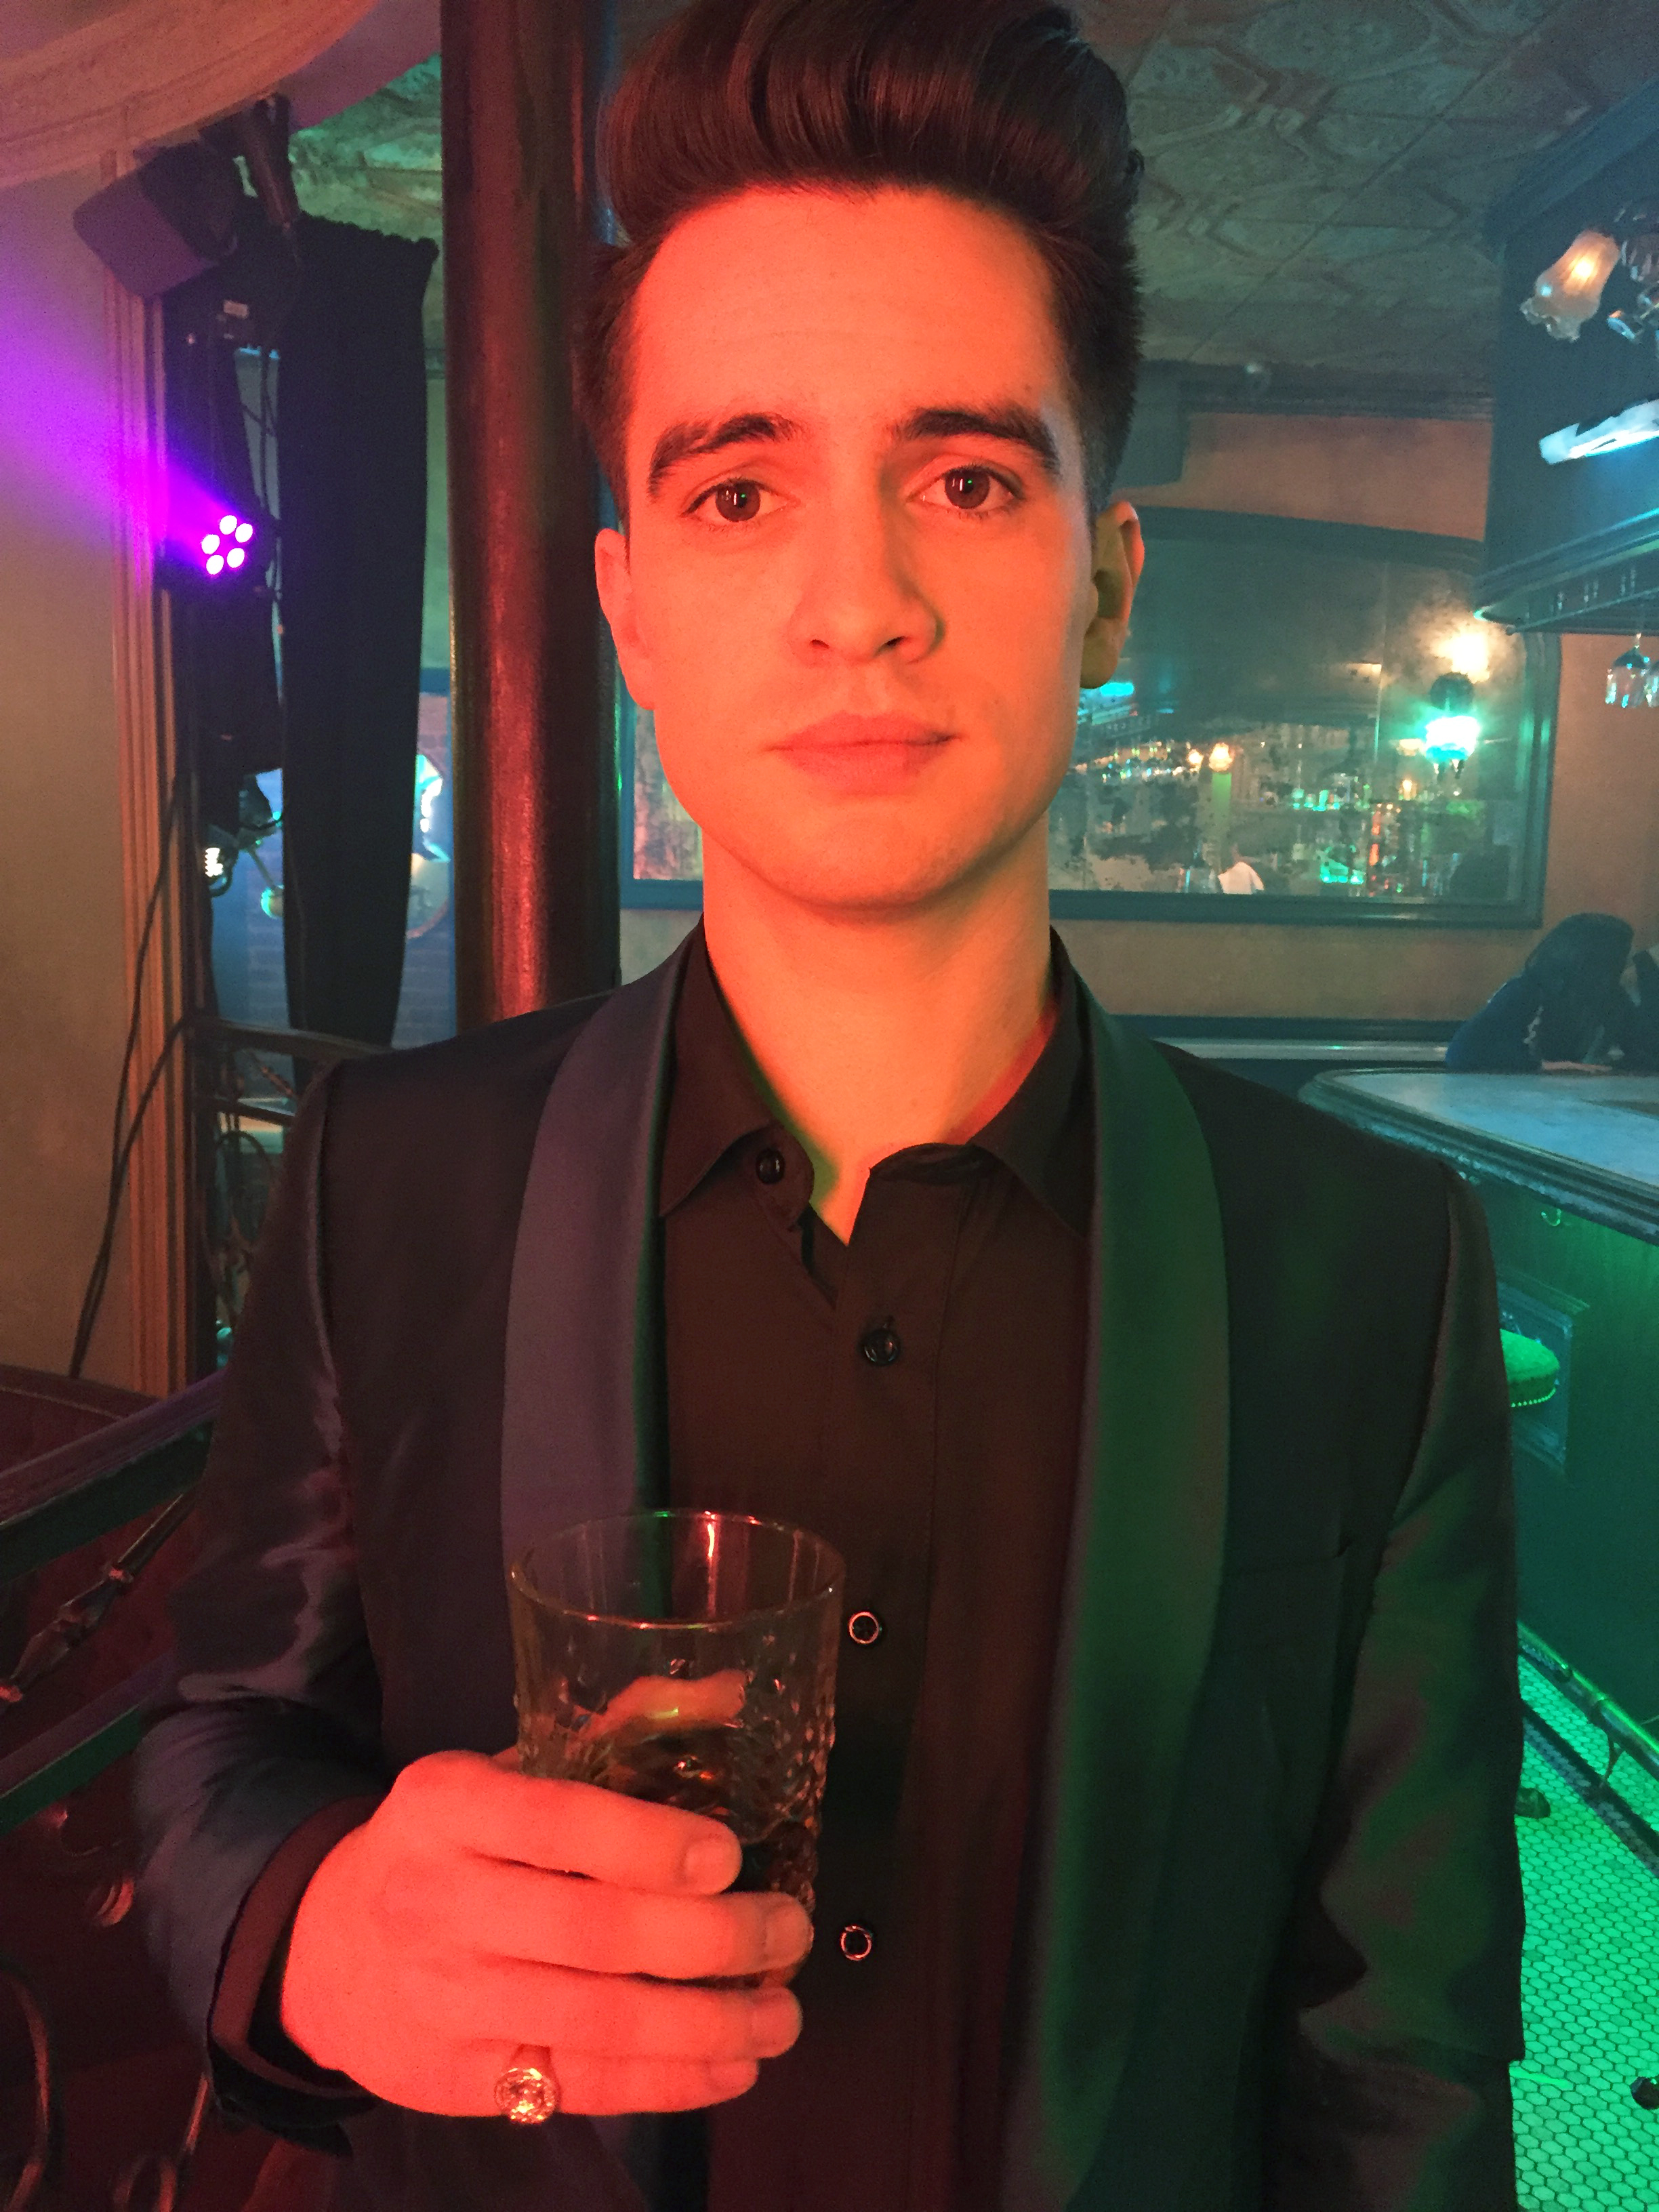 Music Video: "Don't Threaten Me With A Good Time" by Panic! At The Disco